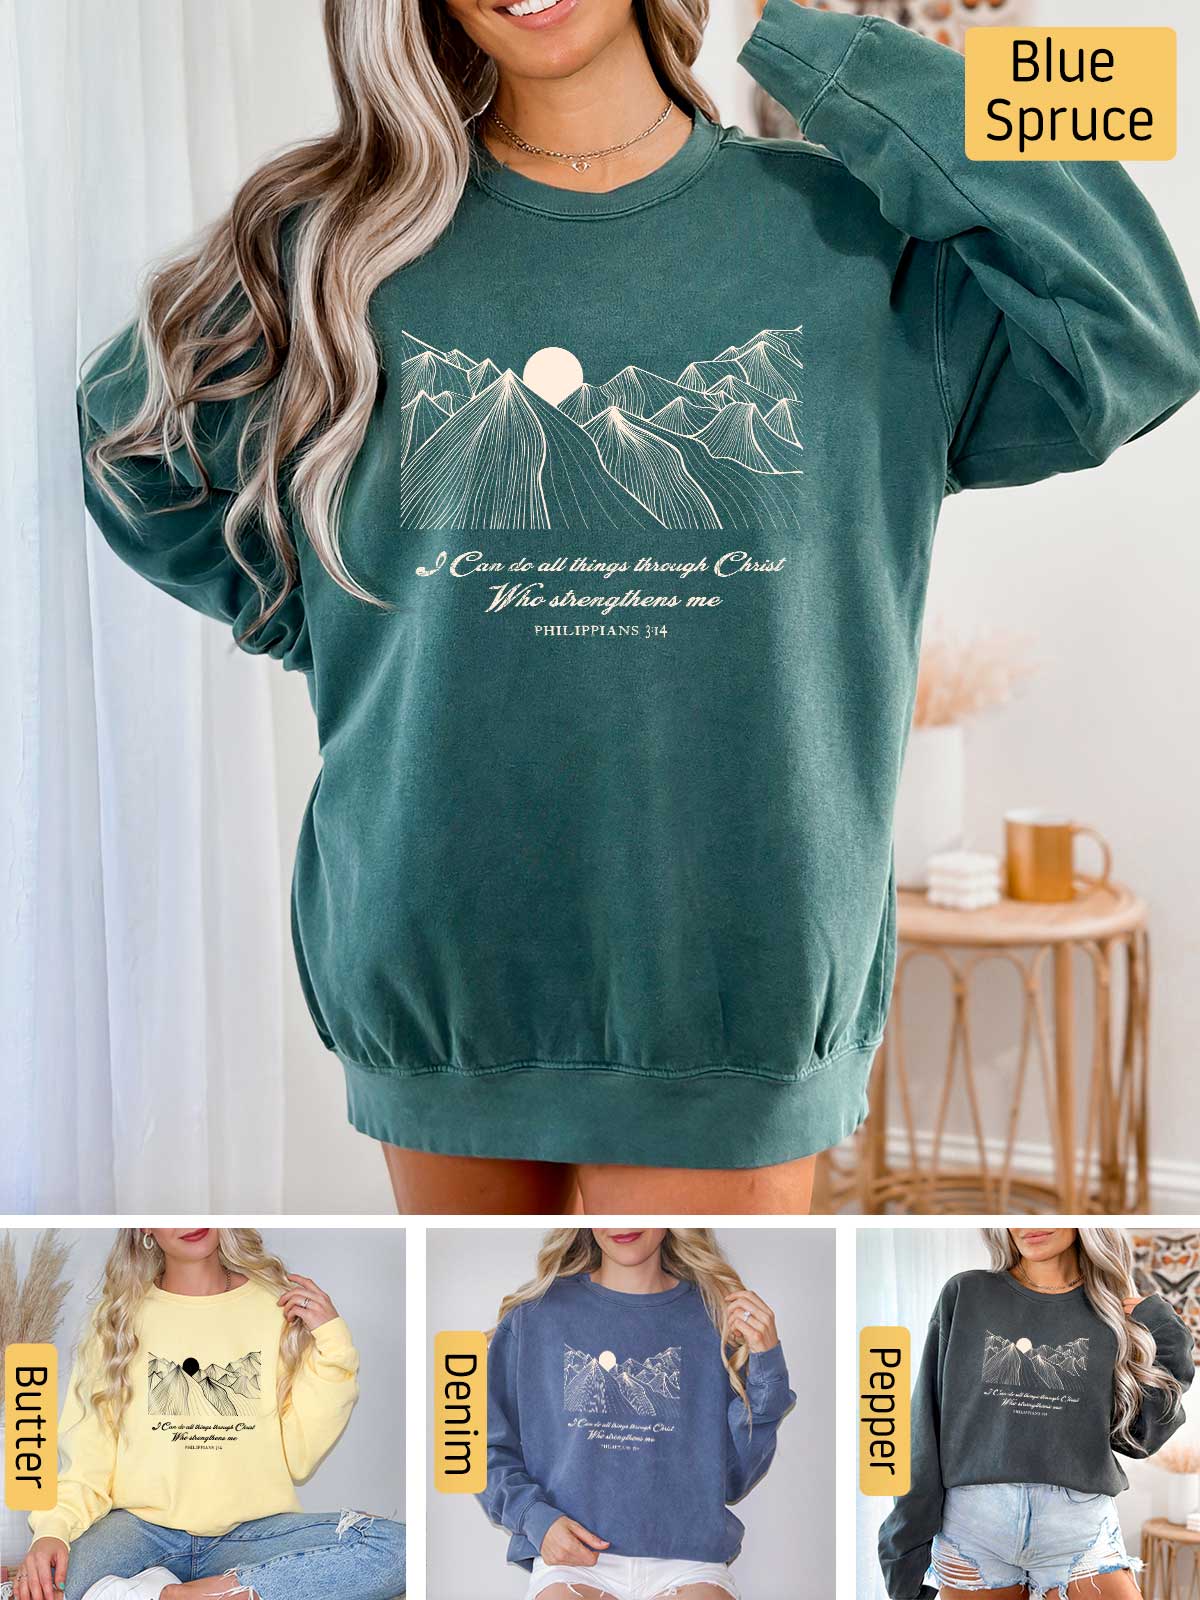 a woman wearing a green sweatshirt with mountains on it